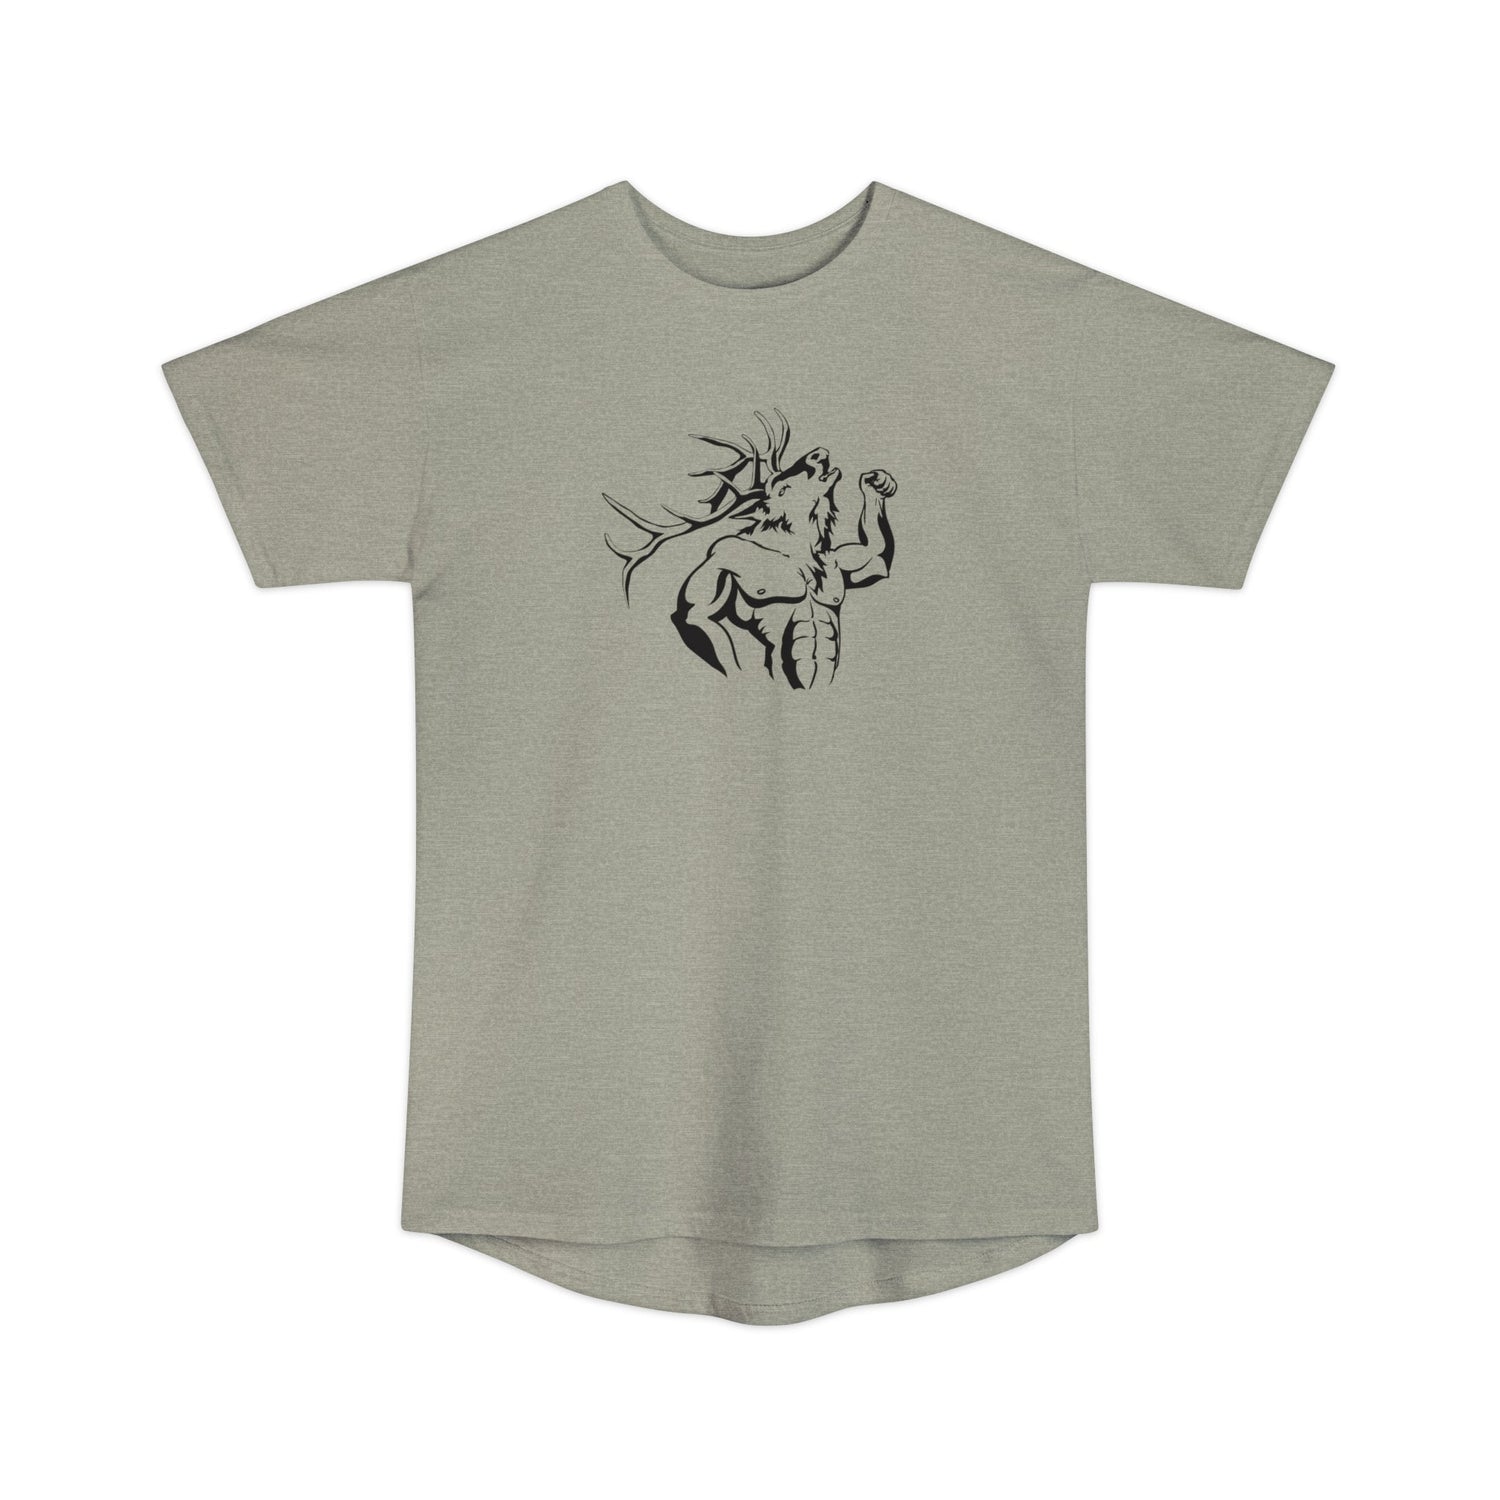 Athletic tall elk hunting t-shirt, color light grey, front design placement